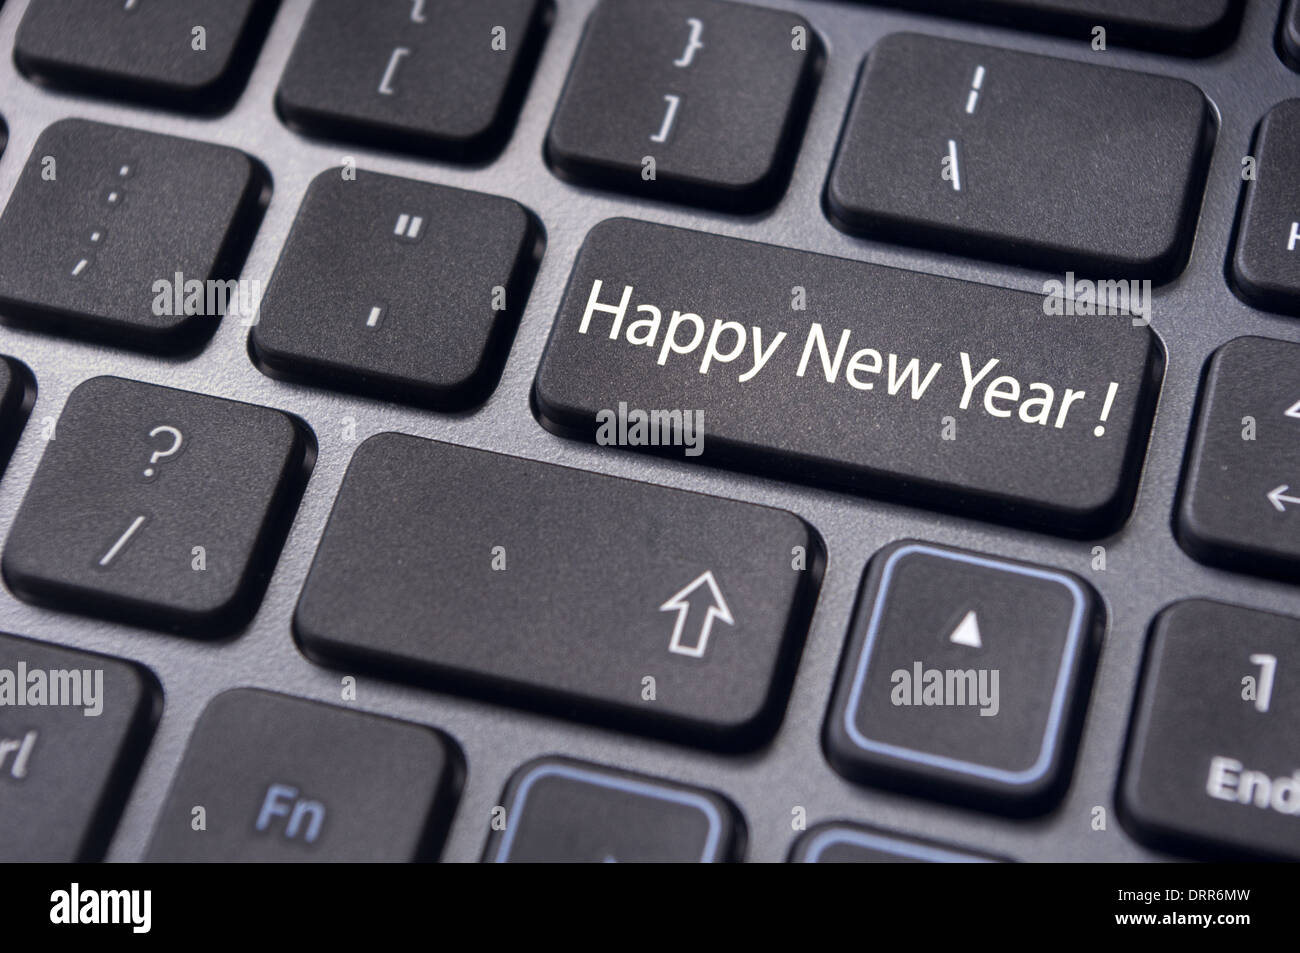 happy new year music clipart keyboard